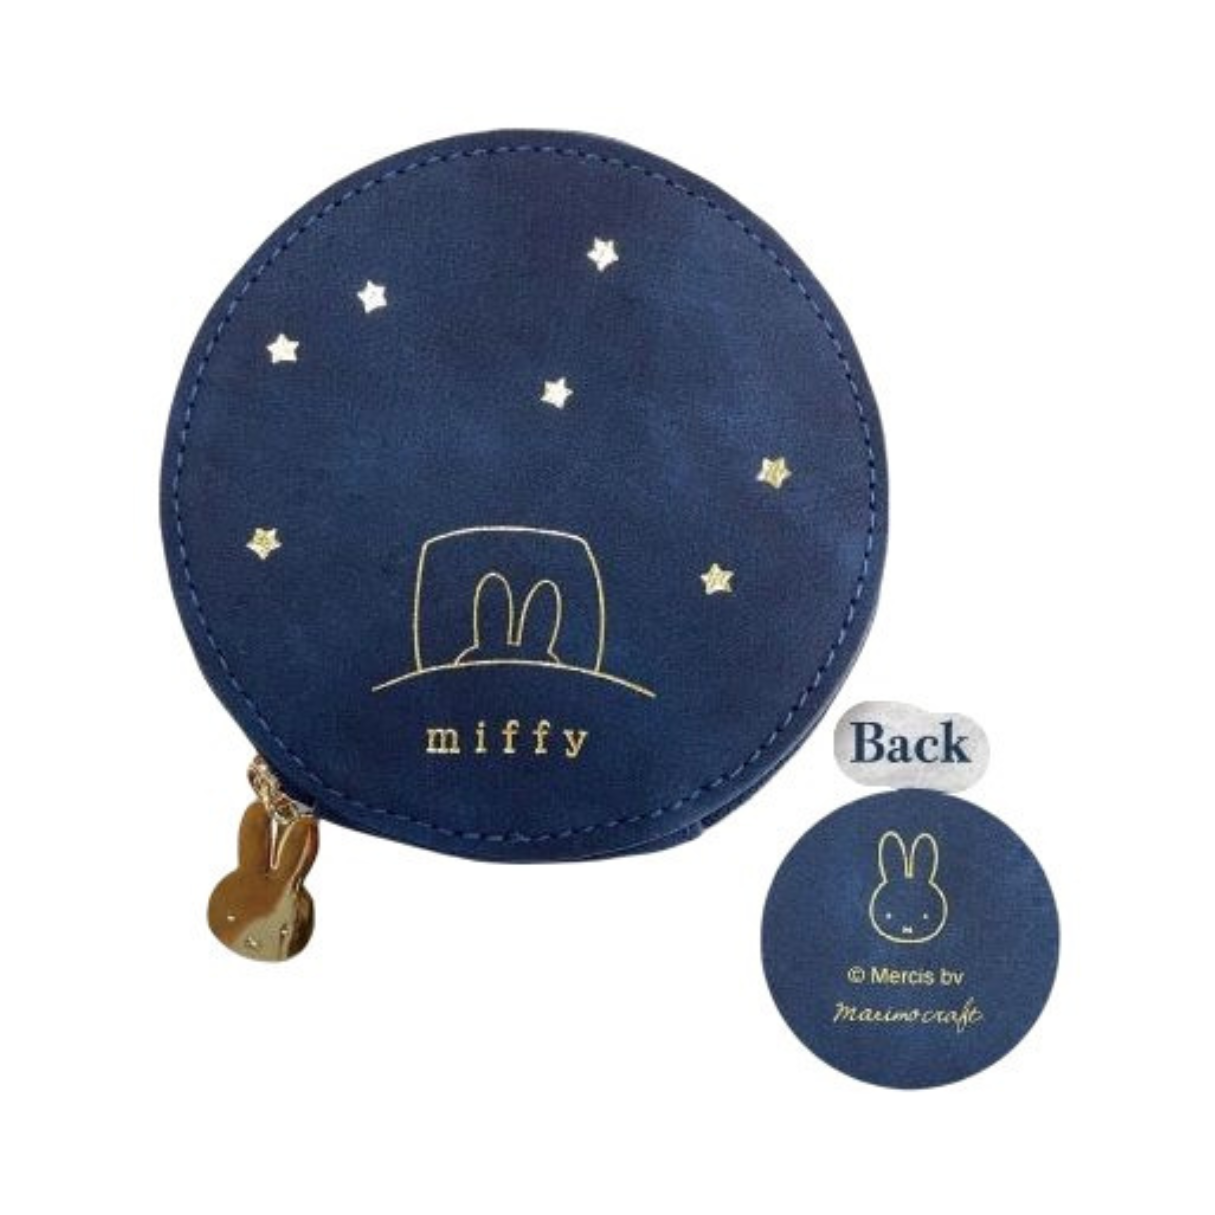 Miffy Good Night Series Small Cosmetic Pouch - Navy